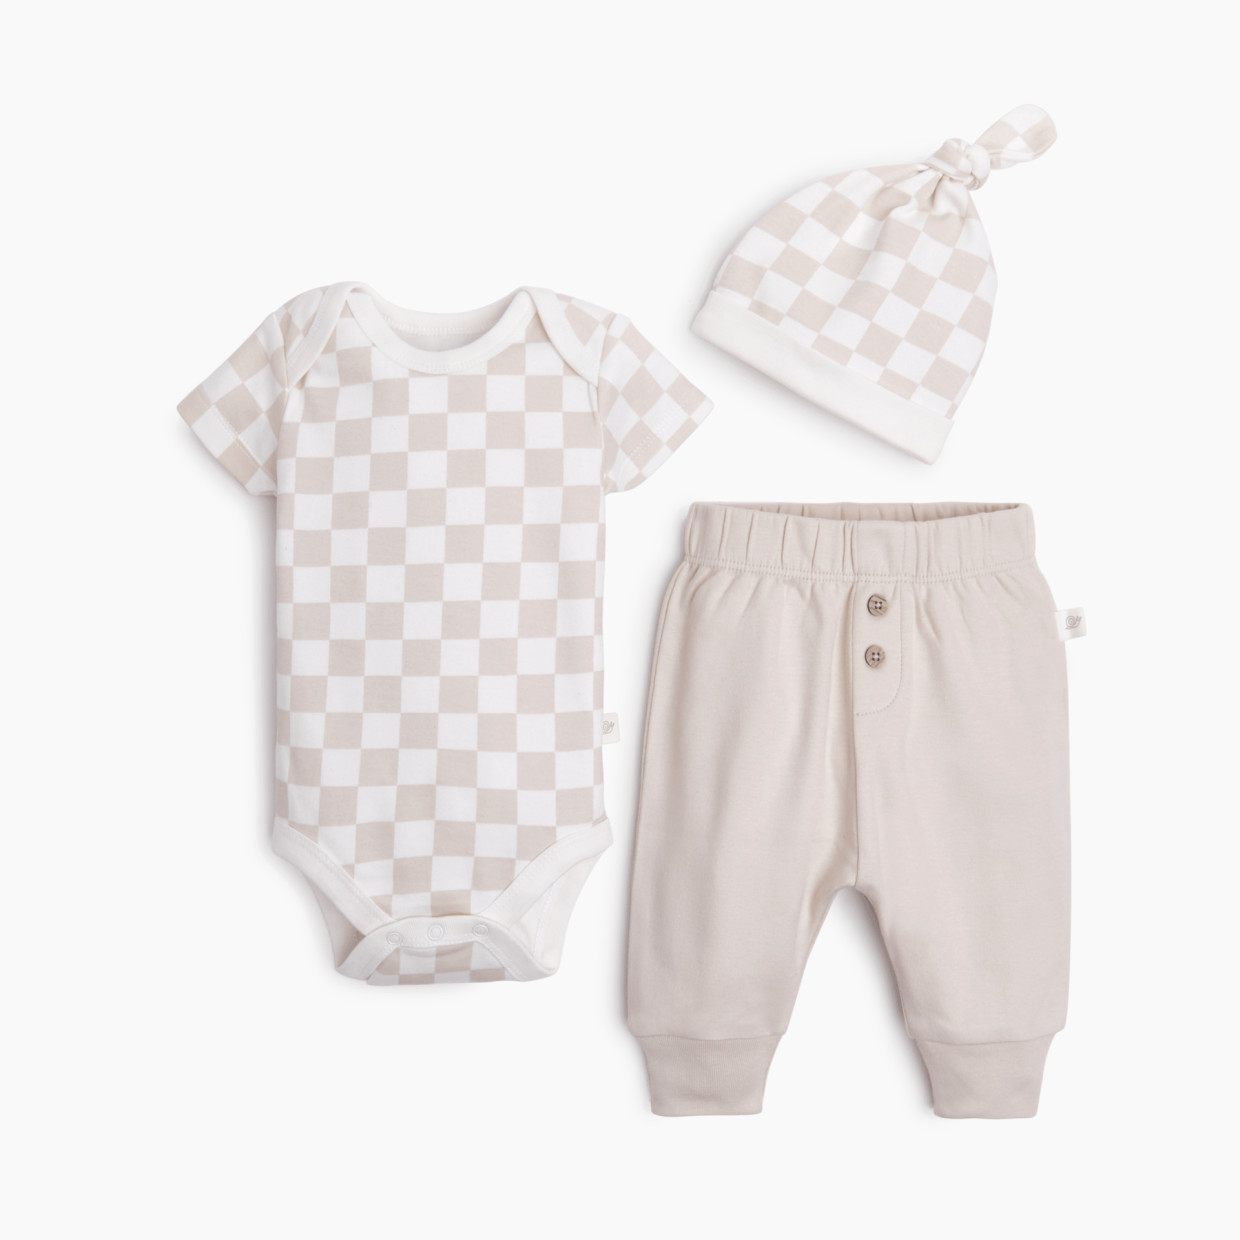 Tiny Kind The Outfit 3 Piece Set - Skate Check, 3-6 M.